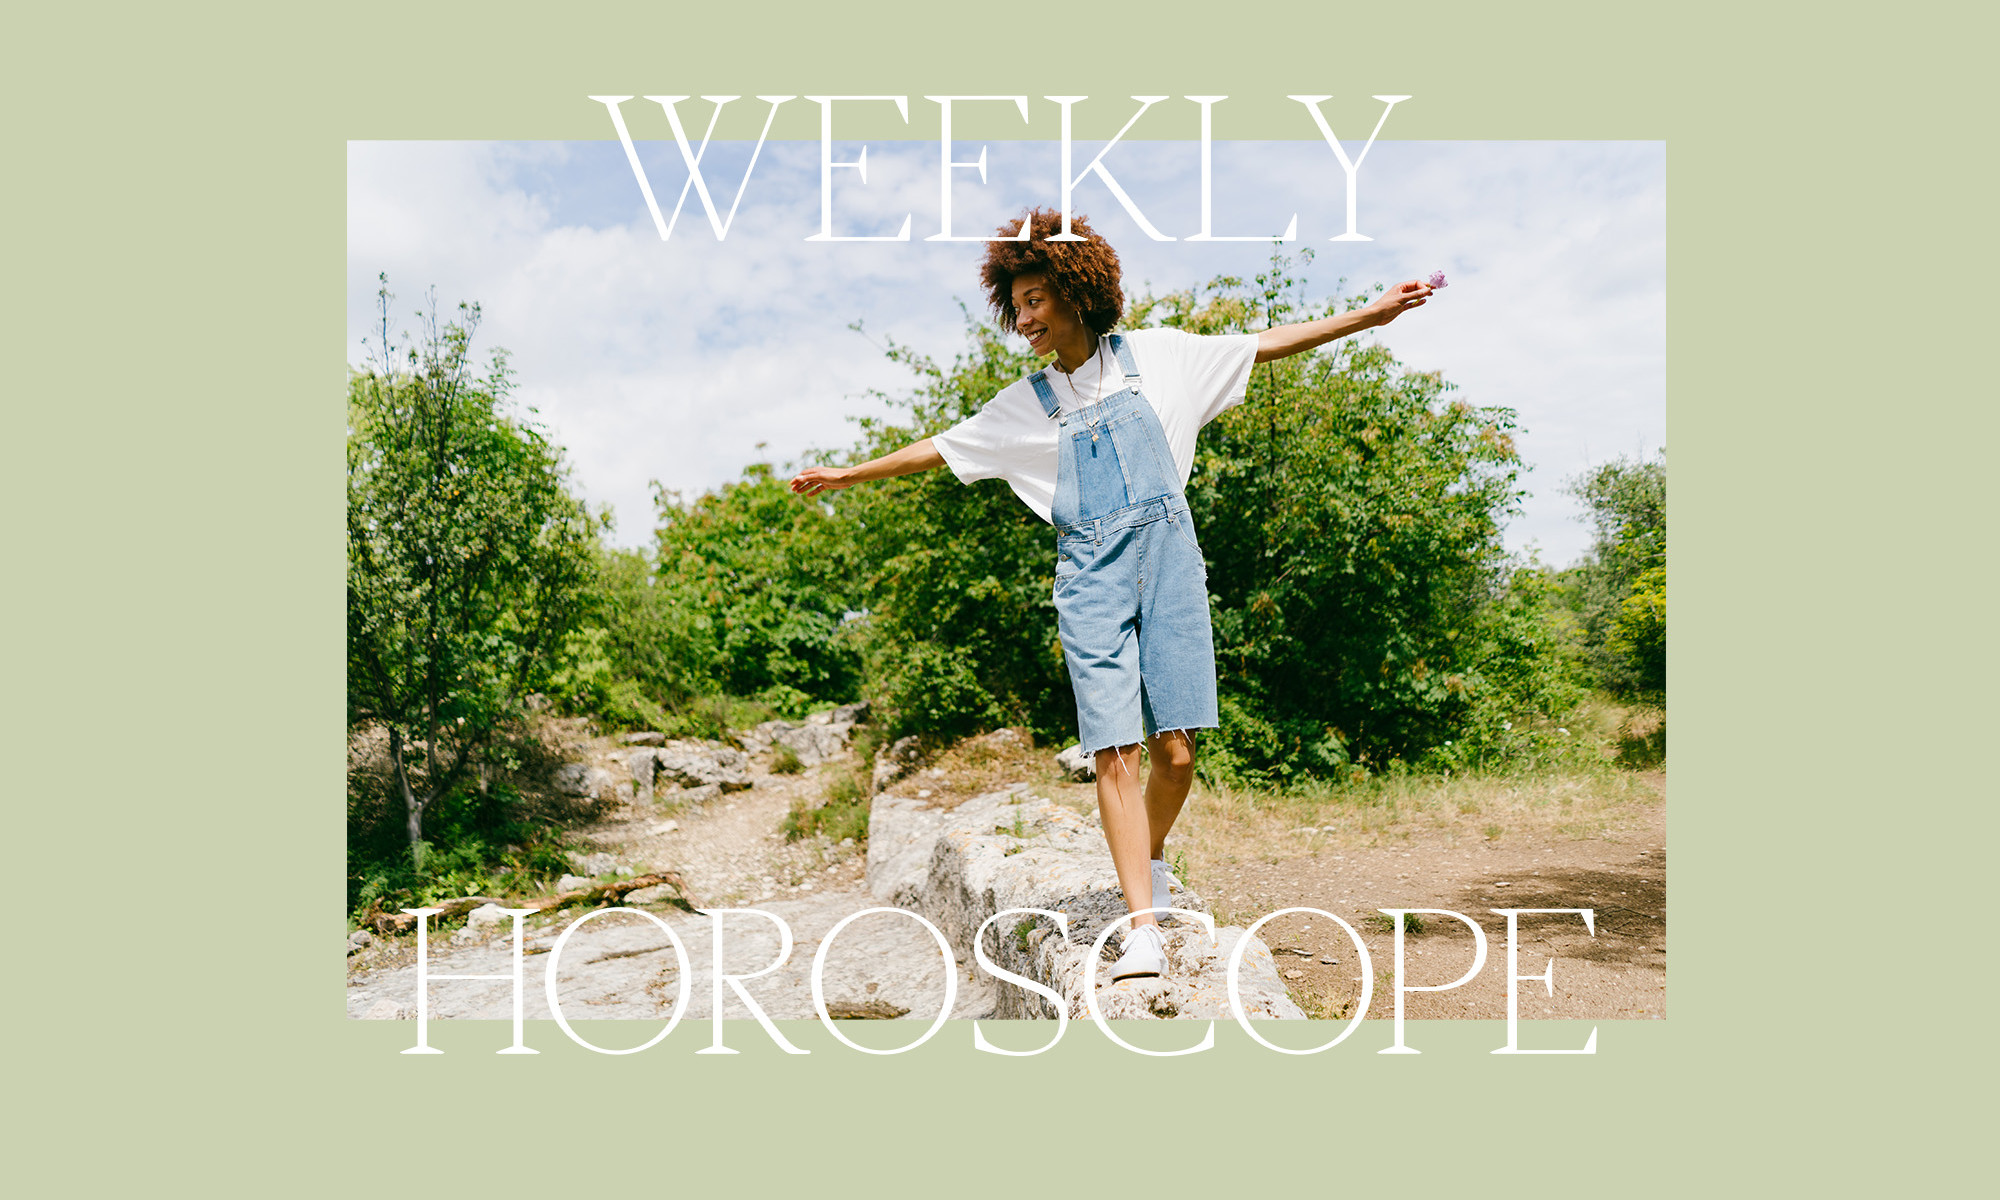 Taurus Season Kicks Off With A Bang This Week—Here's Your Weekly Horoscope